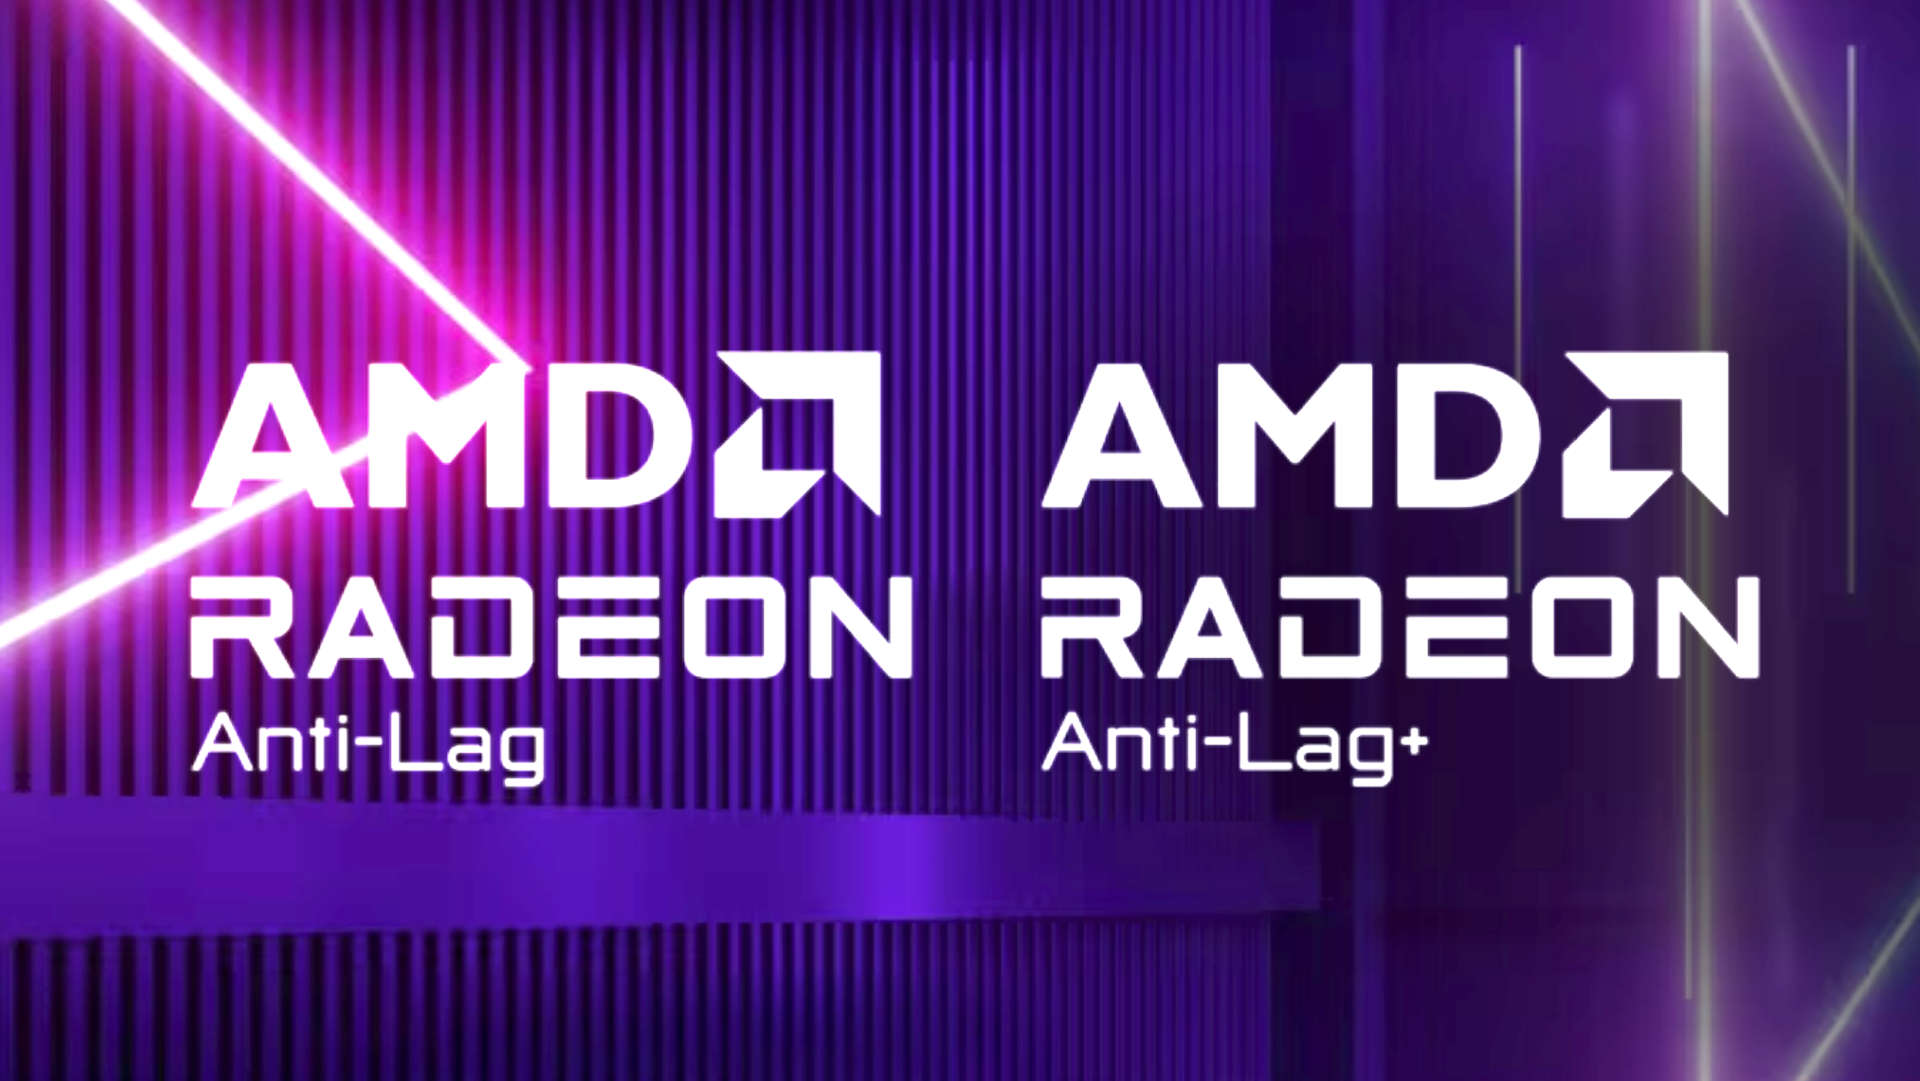  AMD's Anti-Lag+ looks to have been rehabilitated after the previous version gave some players a nasty case of the bans 